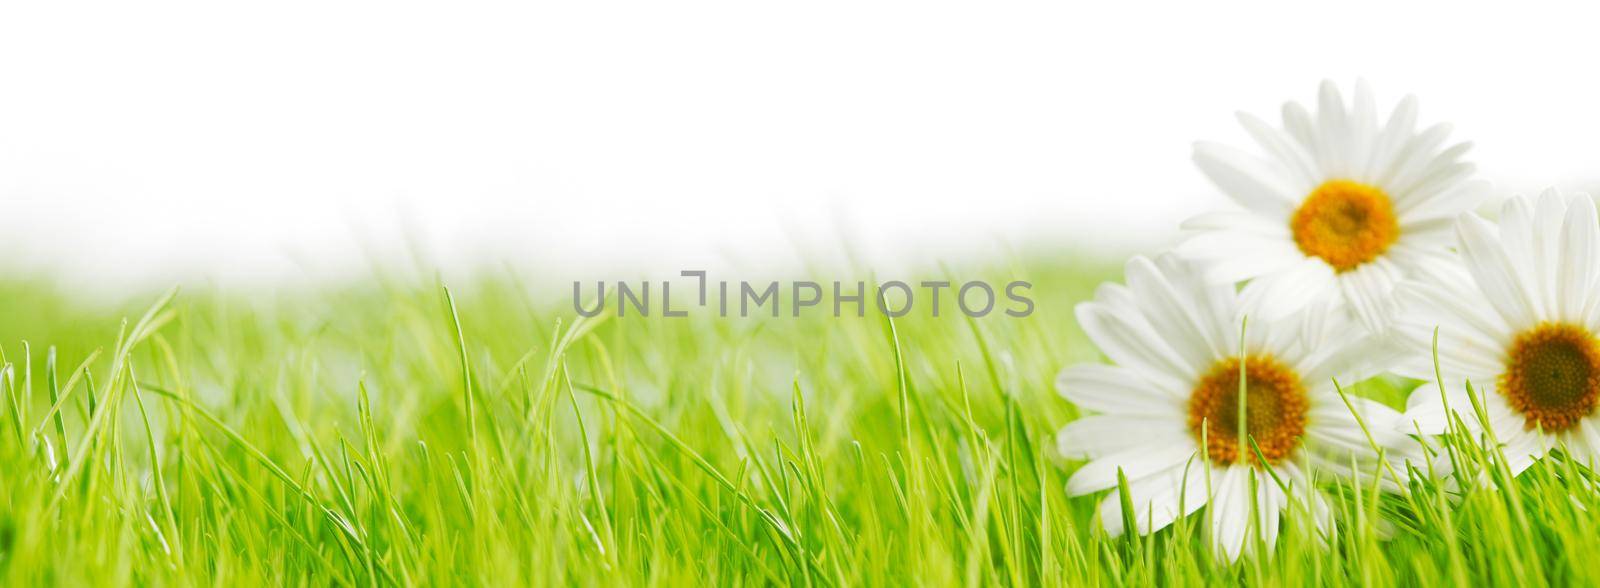 White daisy flowers in green grass isolated on white background, copy space for text